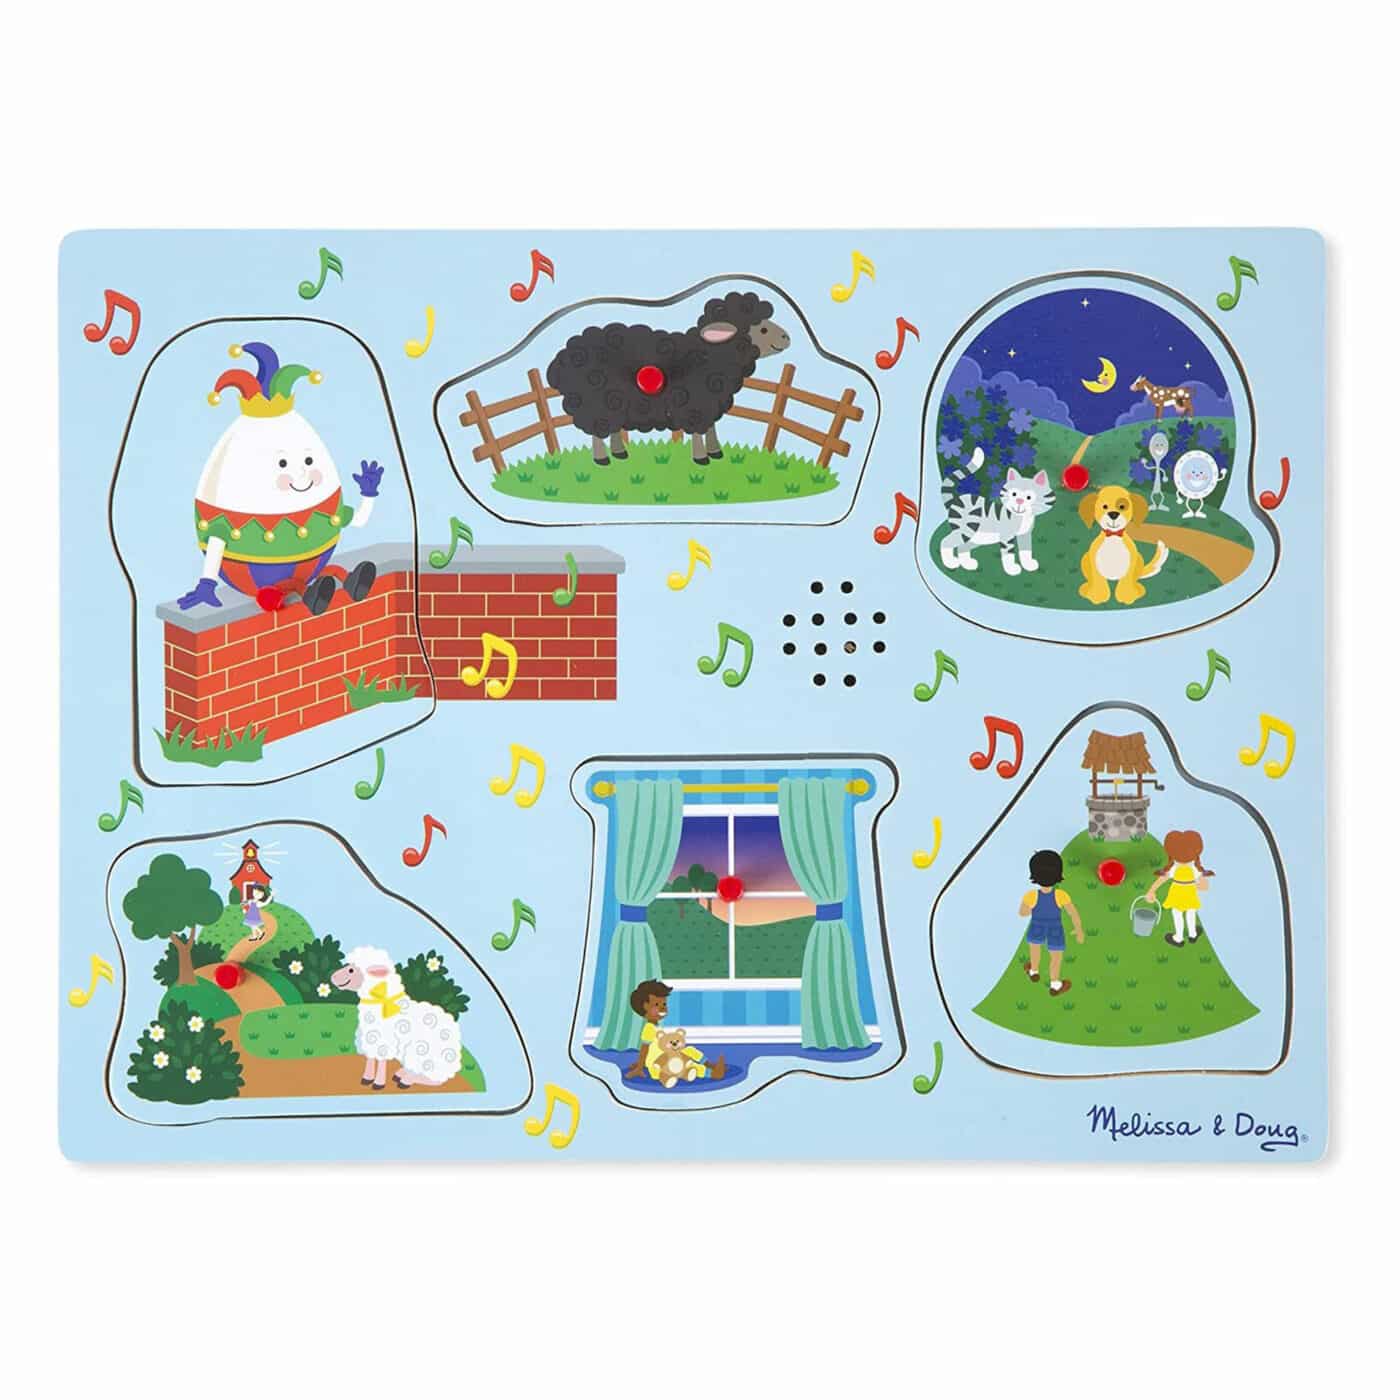 Melissa and Doug - See & Hear Sound Puzzle - Nursery Rhymes